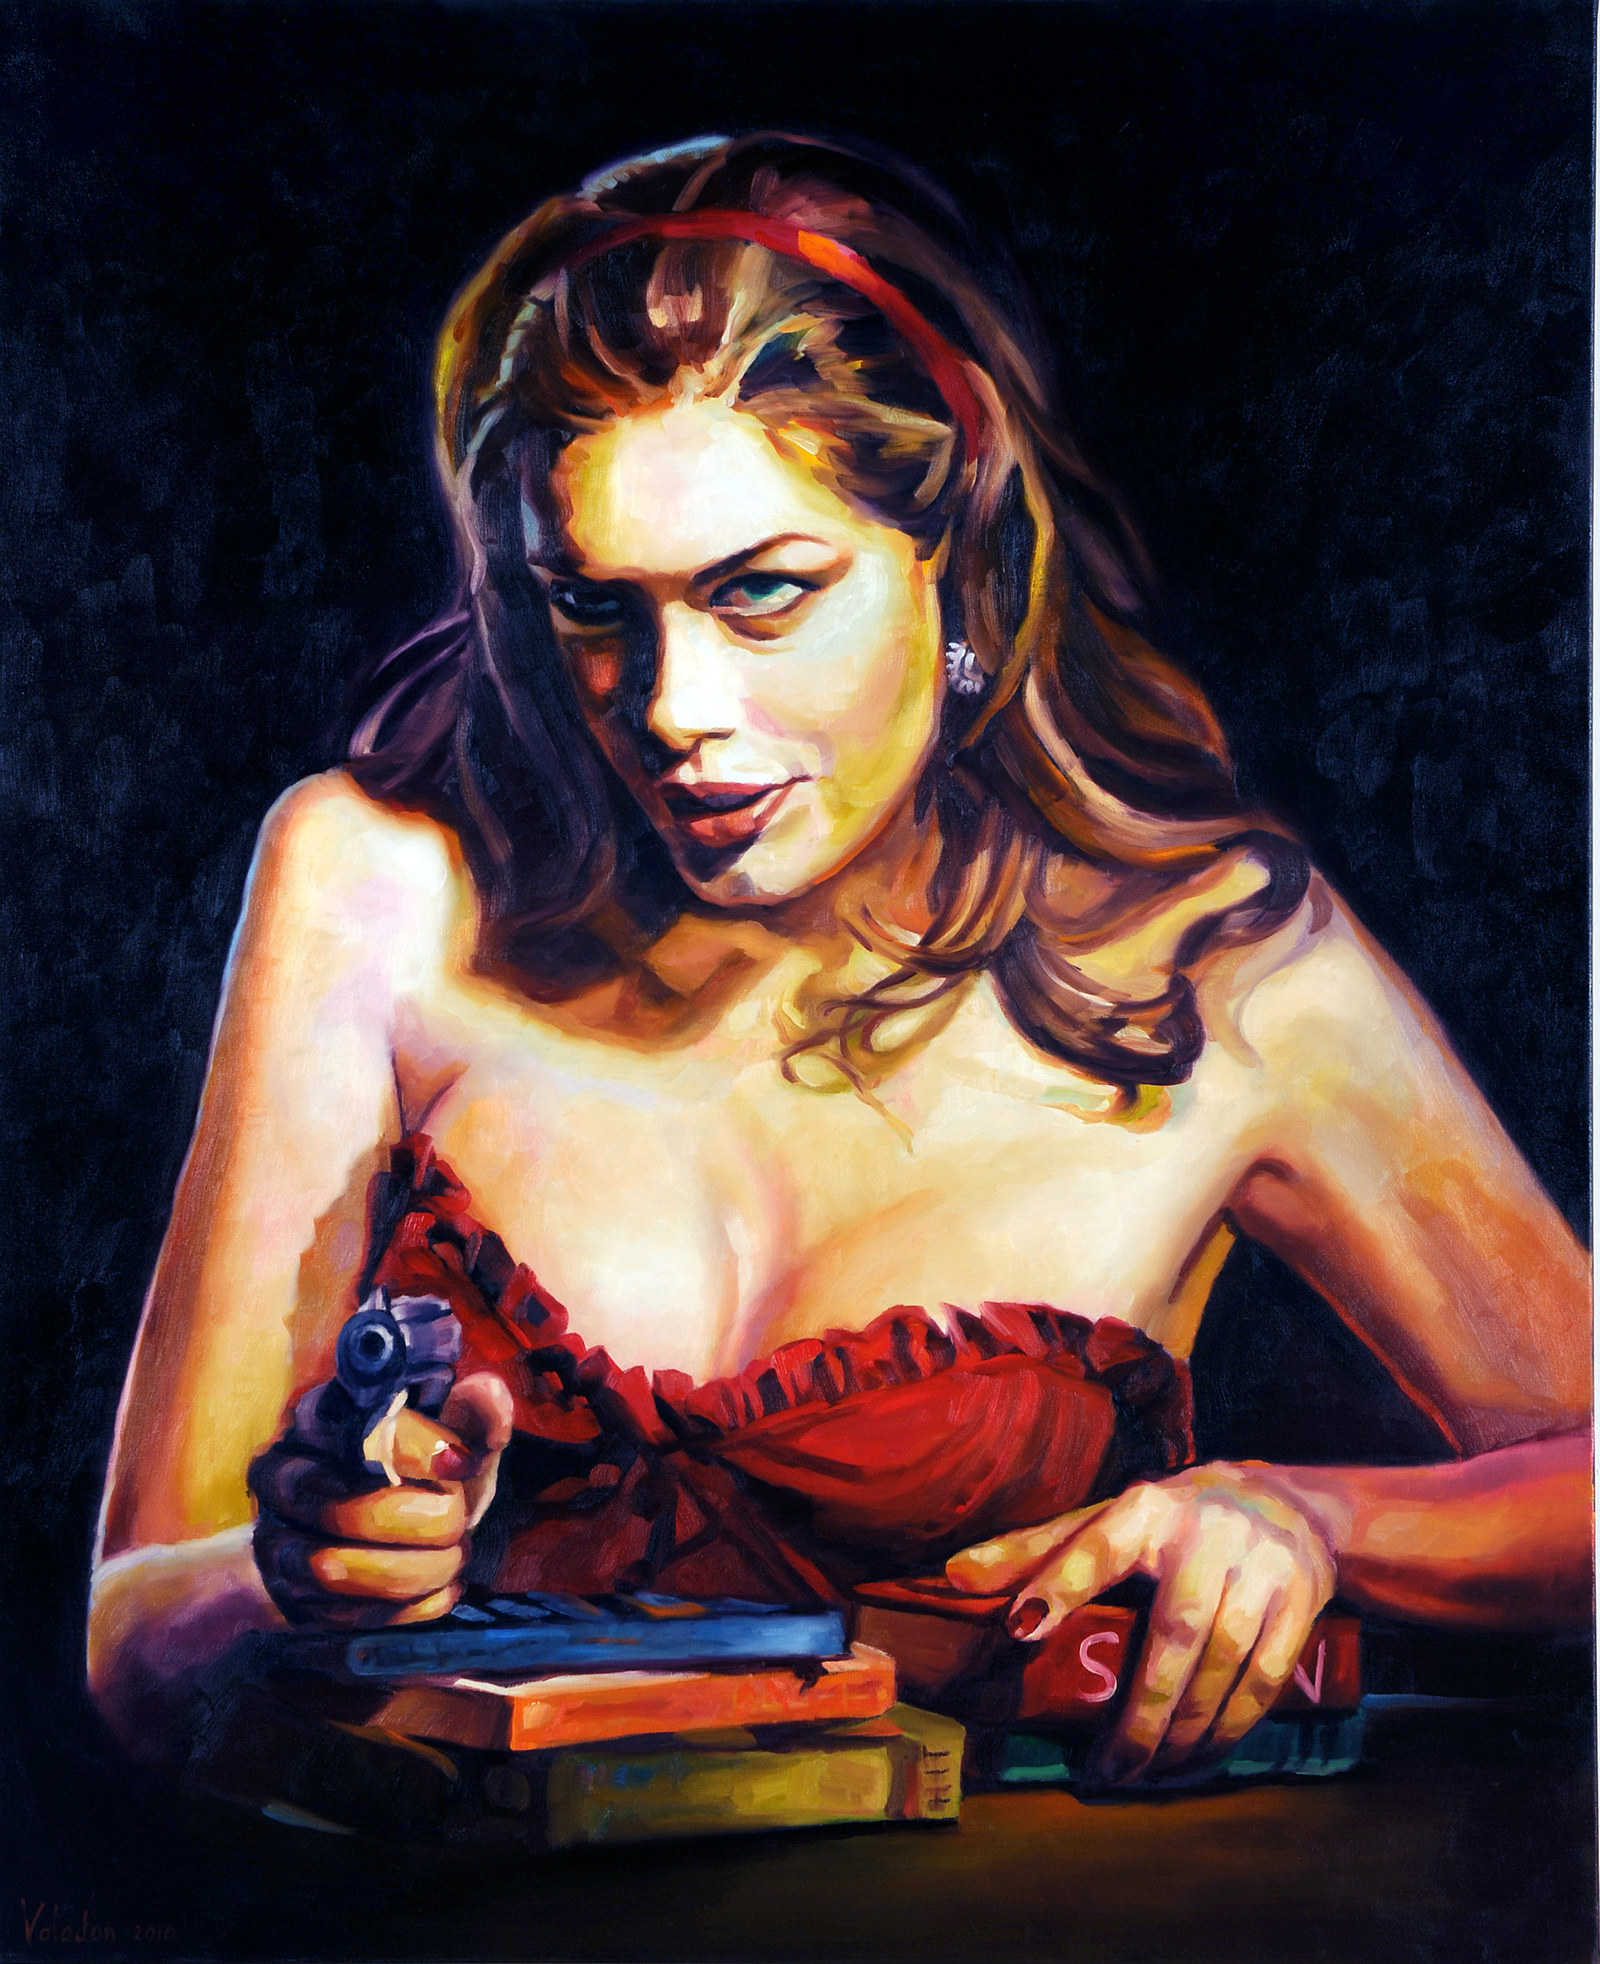 Painting of Tara Moss wearing a low cut red dress and holding a gun. A stack of books sit under her left hand.